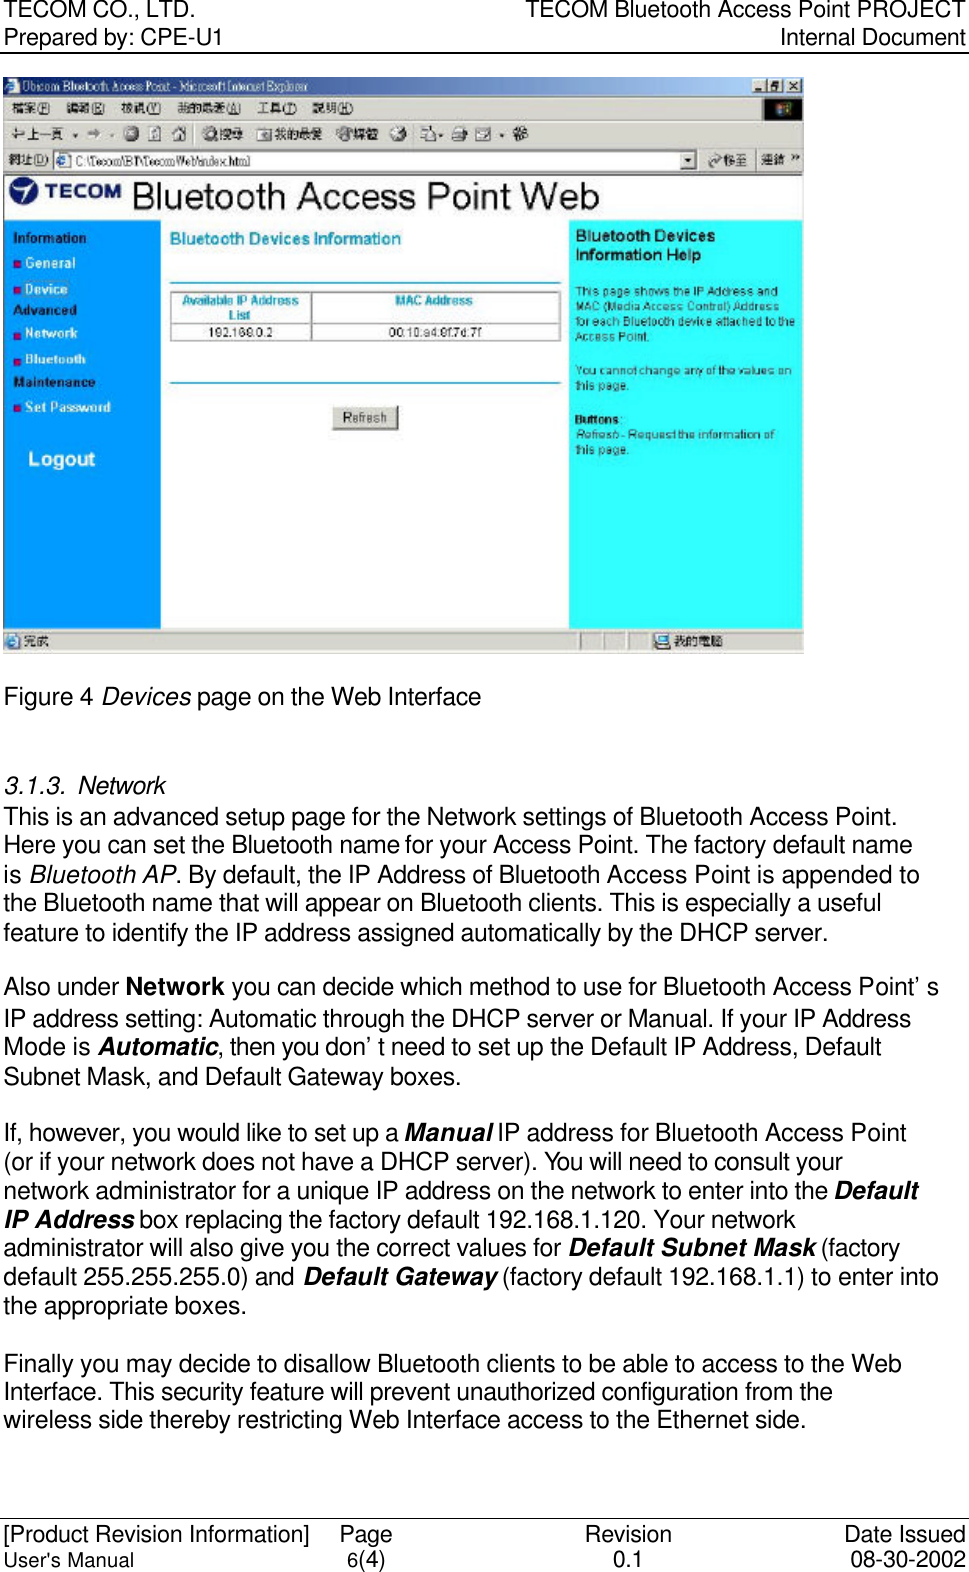 TECOM CO., LTD. TECOM Bluetooth Access Point PROJECT Prepared by: CPE-U1   Internal Document  [Product Revision Information] Page Revision Date Issued User&apos;s Manual 6(4) 0.1 08-30-2002  Figure 4 Devices page on the Web Interface  3.1.3. Network This is an advanced setup page for the Network settings of Bluetooth Access Point. Here you can set the Bluetooth name for your Access Point. The factory default name is Bluetooth AP. By default, the IP Address of Bluetooth Access Point is appended to the Bluetooth name that will appear on Bluetooth clients. This is especially a useful feature to identify the IP address assigned automatically by the DHCP server.  Also under Network you can decide which method to use for Bluetooth Access Point’s IP address setting: Automatic through the DHCP server or Manual. If your IP Address Mode is Automatic, then you don’t need to set up the Default IP Address, Default Subnet Mask, and Default Gateway boxes.    If, however, you would like to set up a Manual IP address for Bluetooth Access Point (or if your network does not have a DHCP server). You will need to consult your network administrator for a unique IP address on the network to enter into the Default IP Address box replacing the factory default 192.168.1.120. Your network administrator will also give you the correct values for Default Subnet Mask (factory default 255.255.255.0) and Default Gateway (factory default 192.168.1.1) to enter into the appropriate boxes.  Finally you may decide to disallow Bluetooth clients to be able to access to the Web Interface. This security feature will prevent unauthorized configuration from the wireless side thereby restricting Web Interface access to the Ethernet side.     